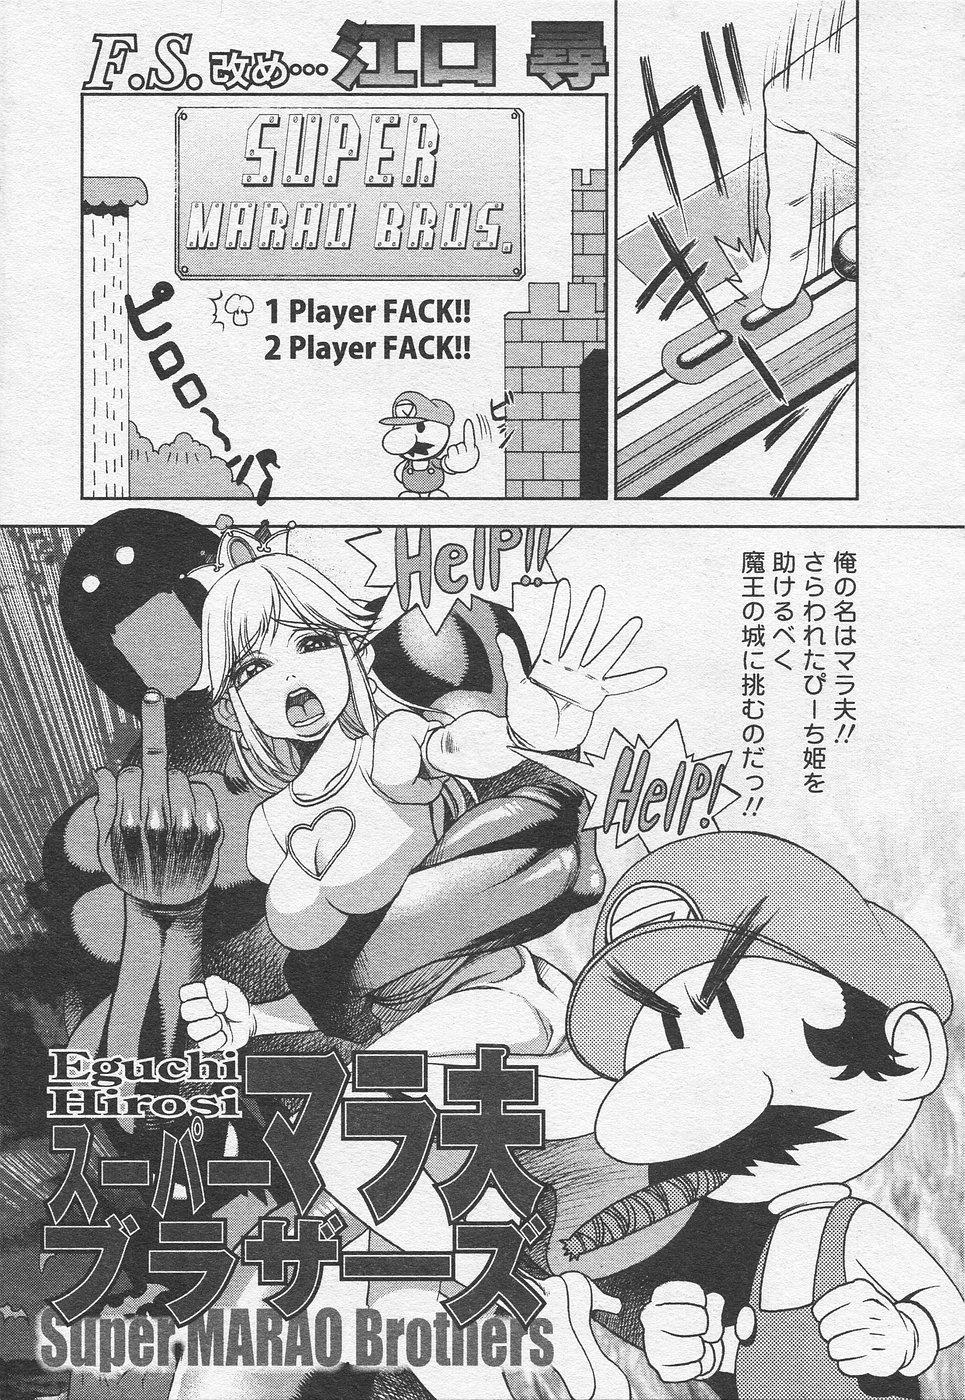 Blond Super Marao Brothers - Super mario brothers Master - Page 1